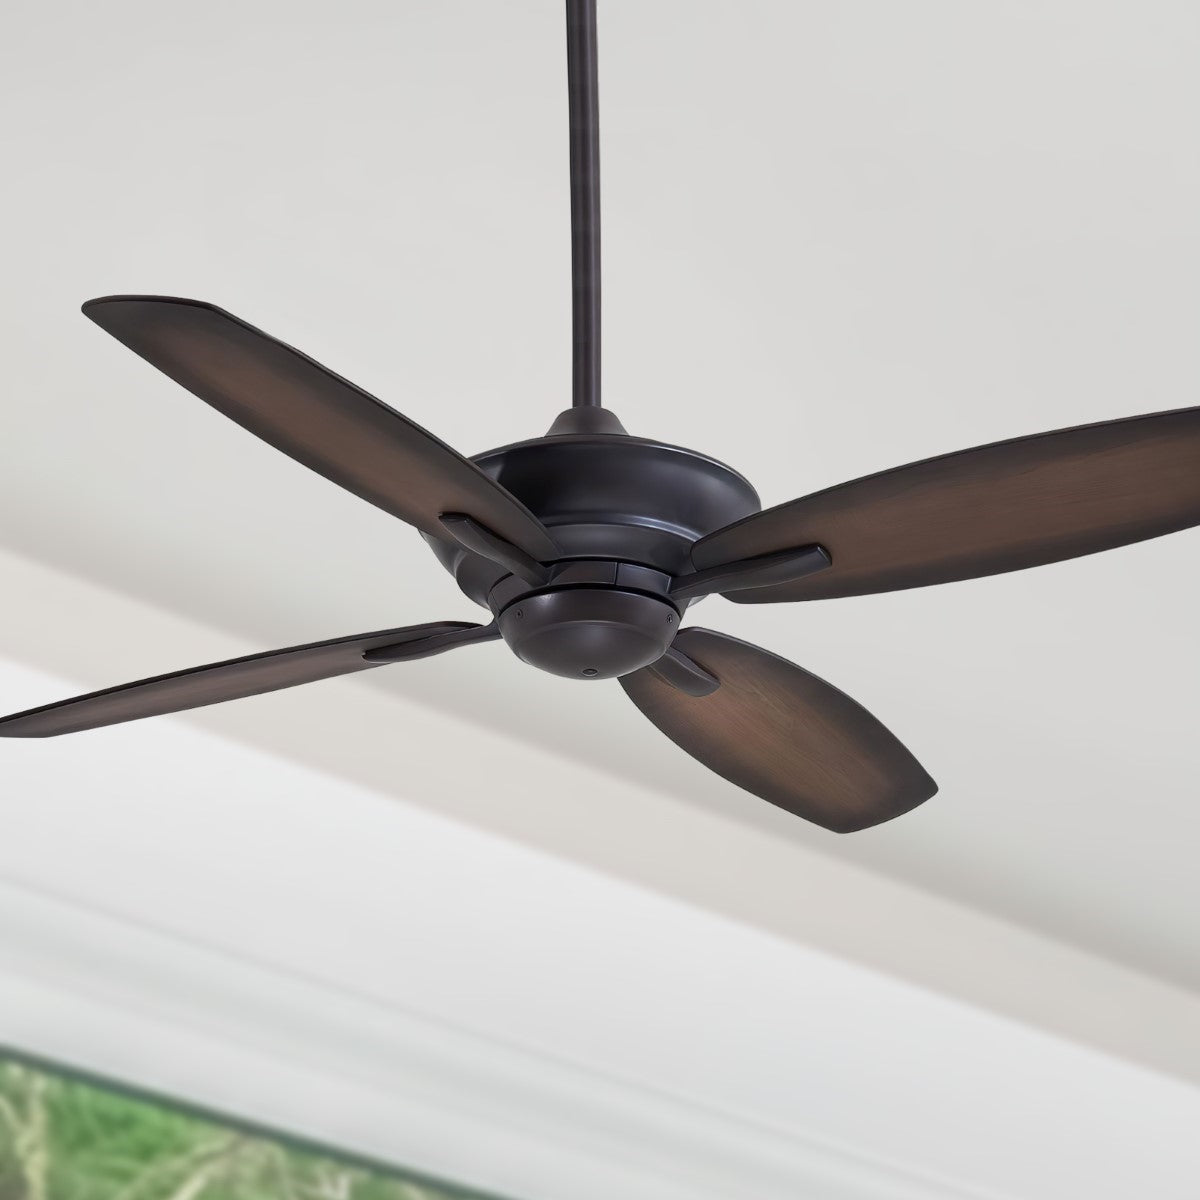 New Era 52 Inch Ceiling Fan With Remote